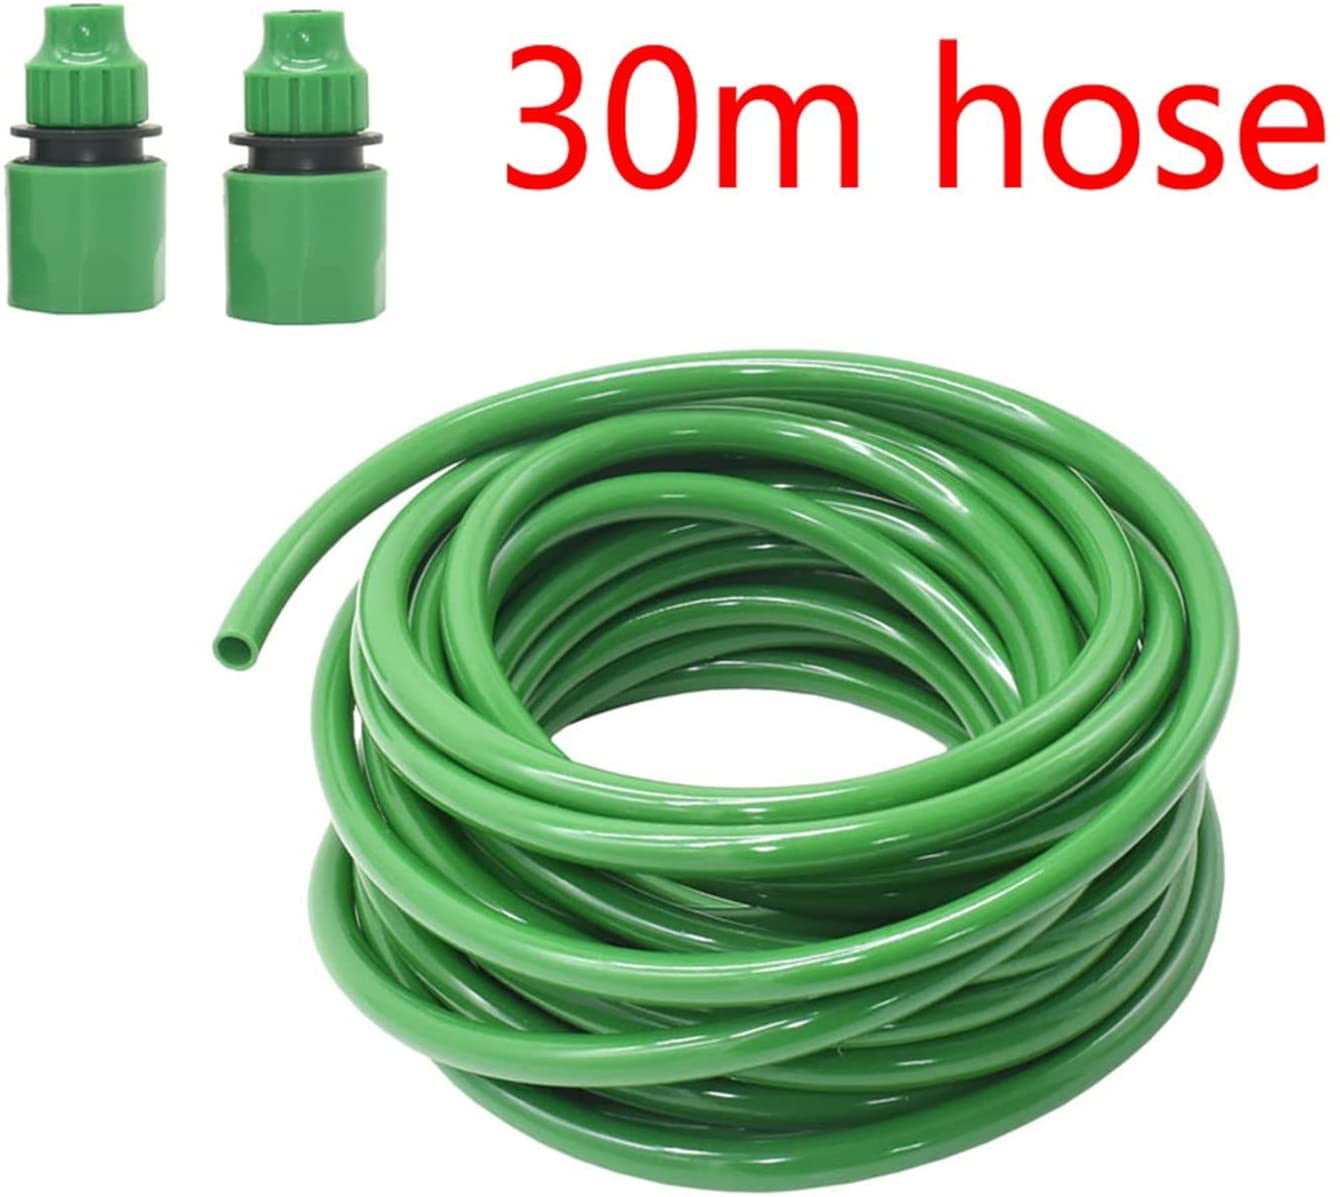 10/20/50m PVC Plastic Garden Water Irrigation Hose Pipe 4/7mm for Agriculture 